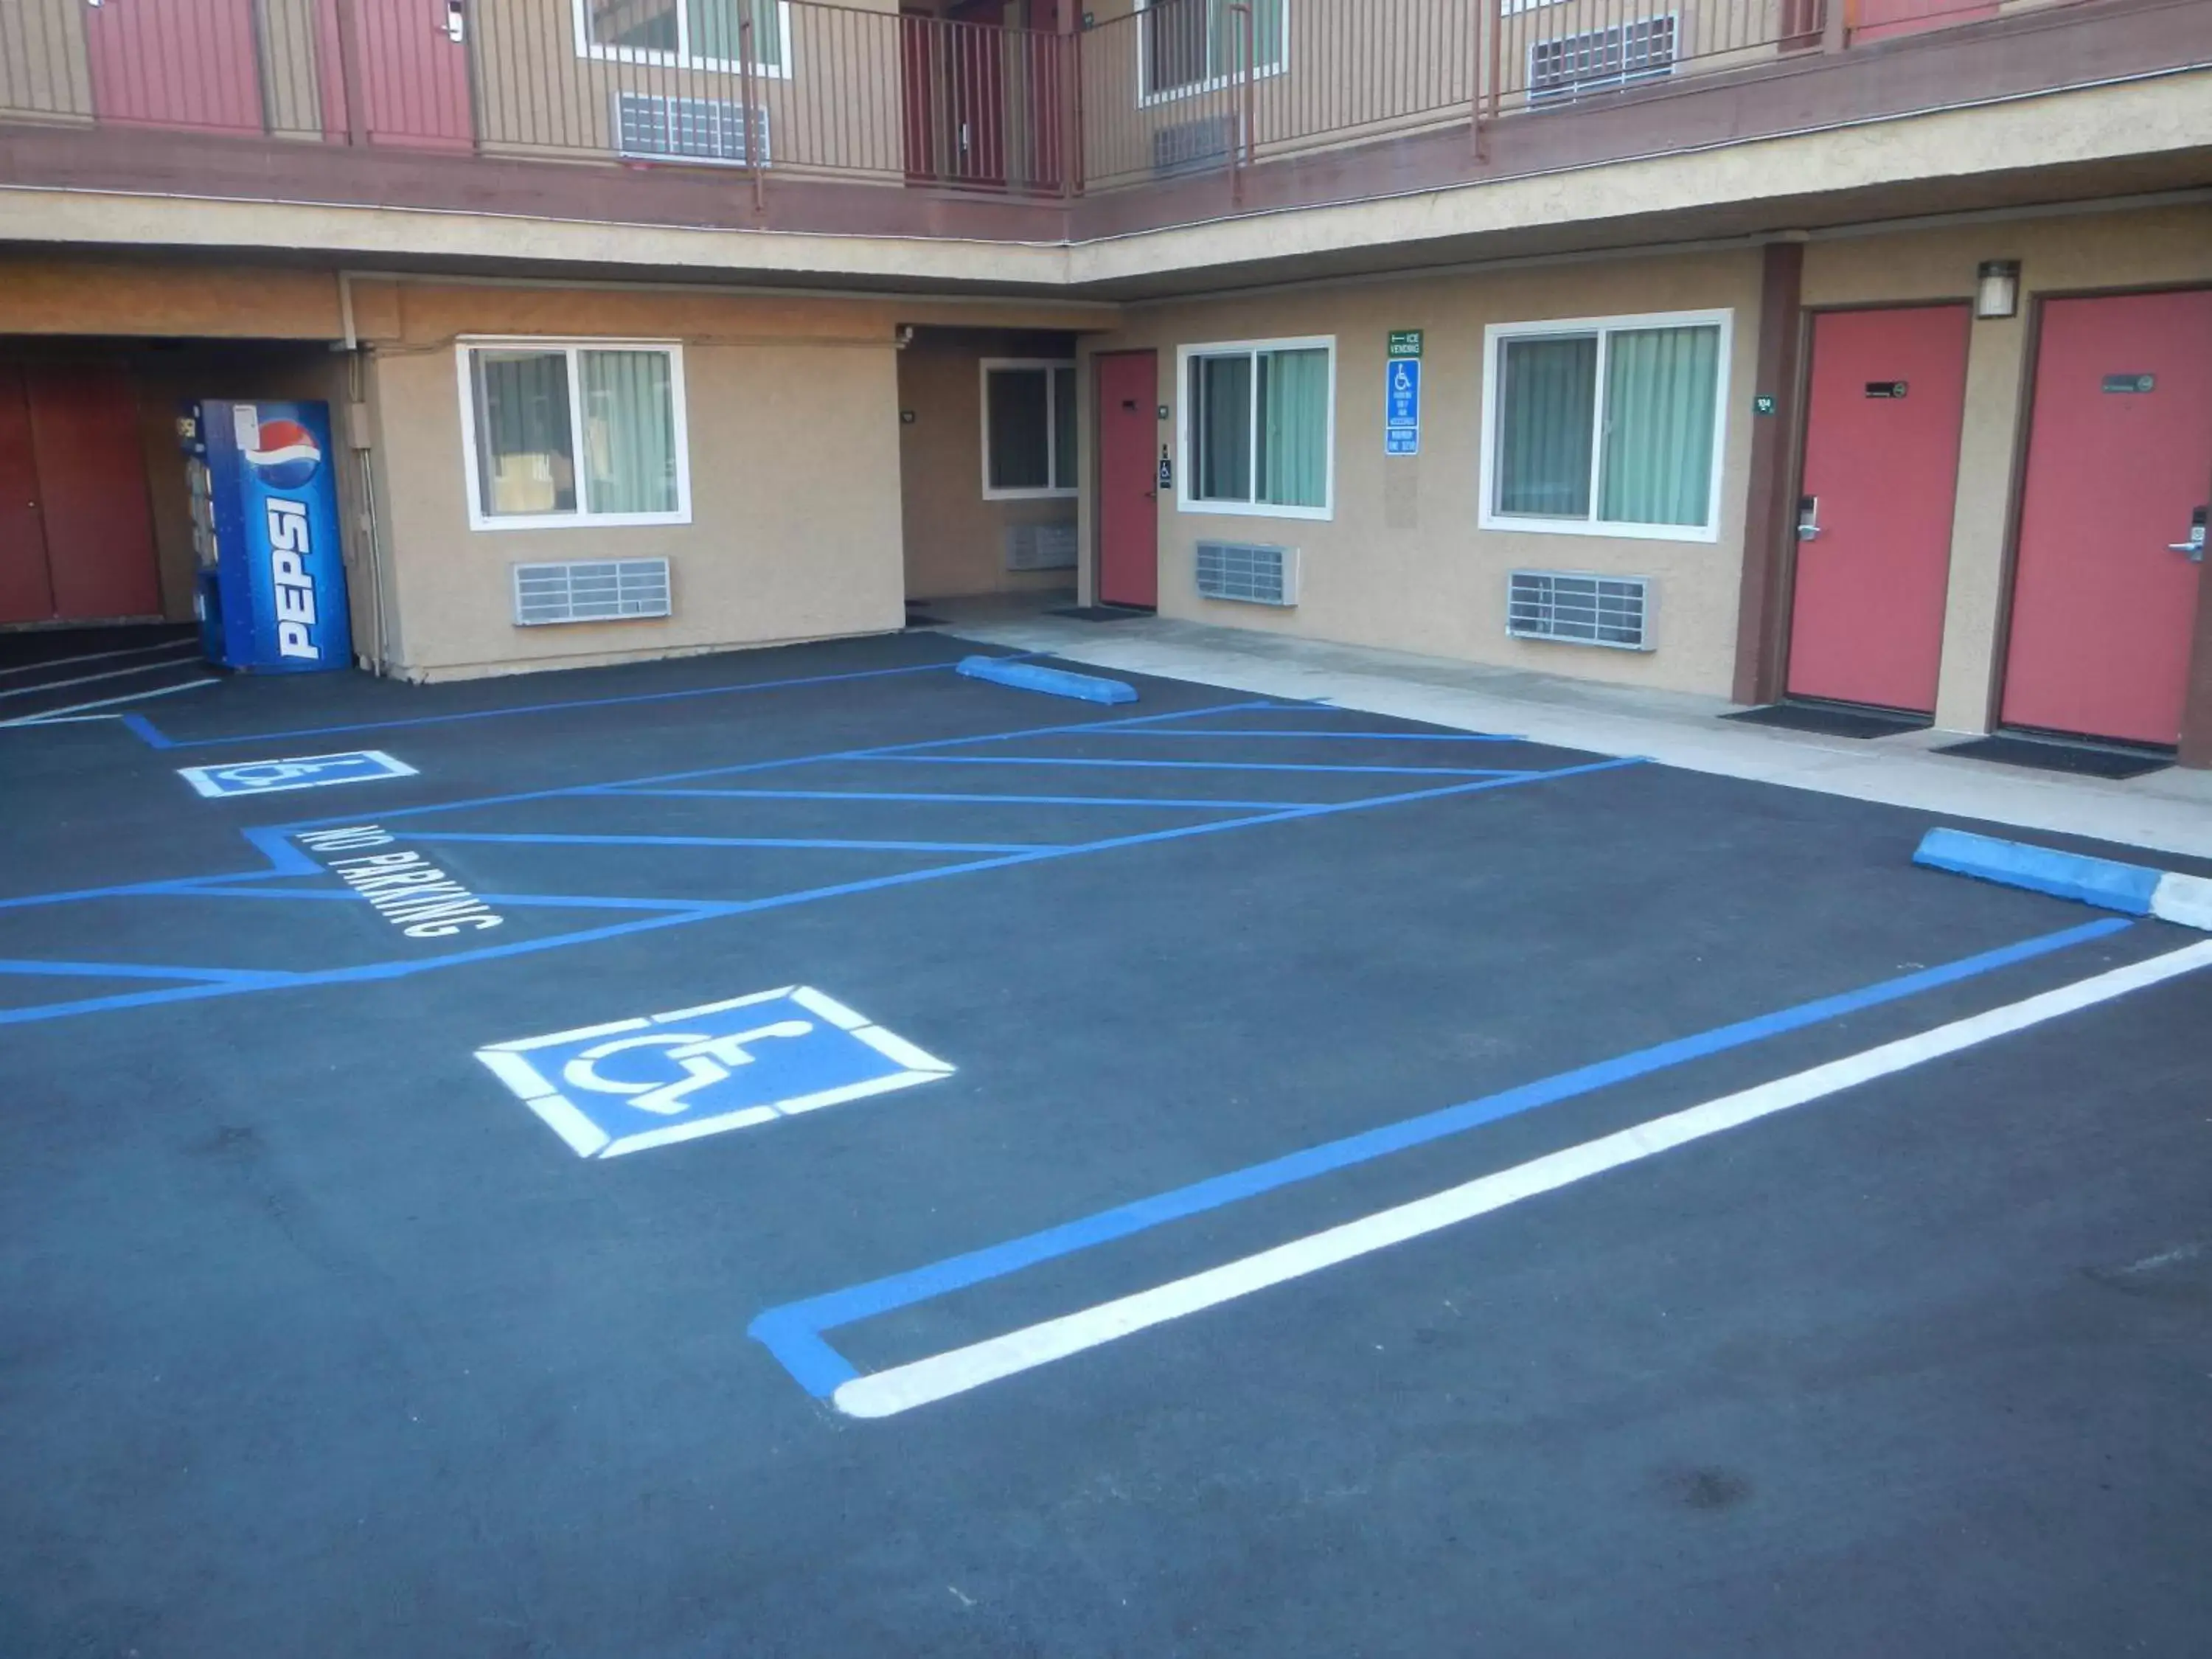 Property building, Other Activities in Rodeway Inn Carson - Los Angeles South